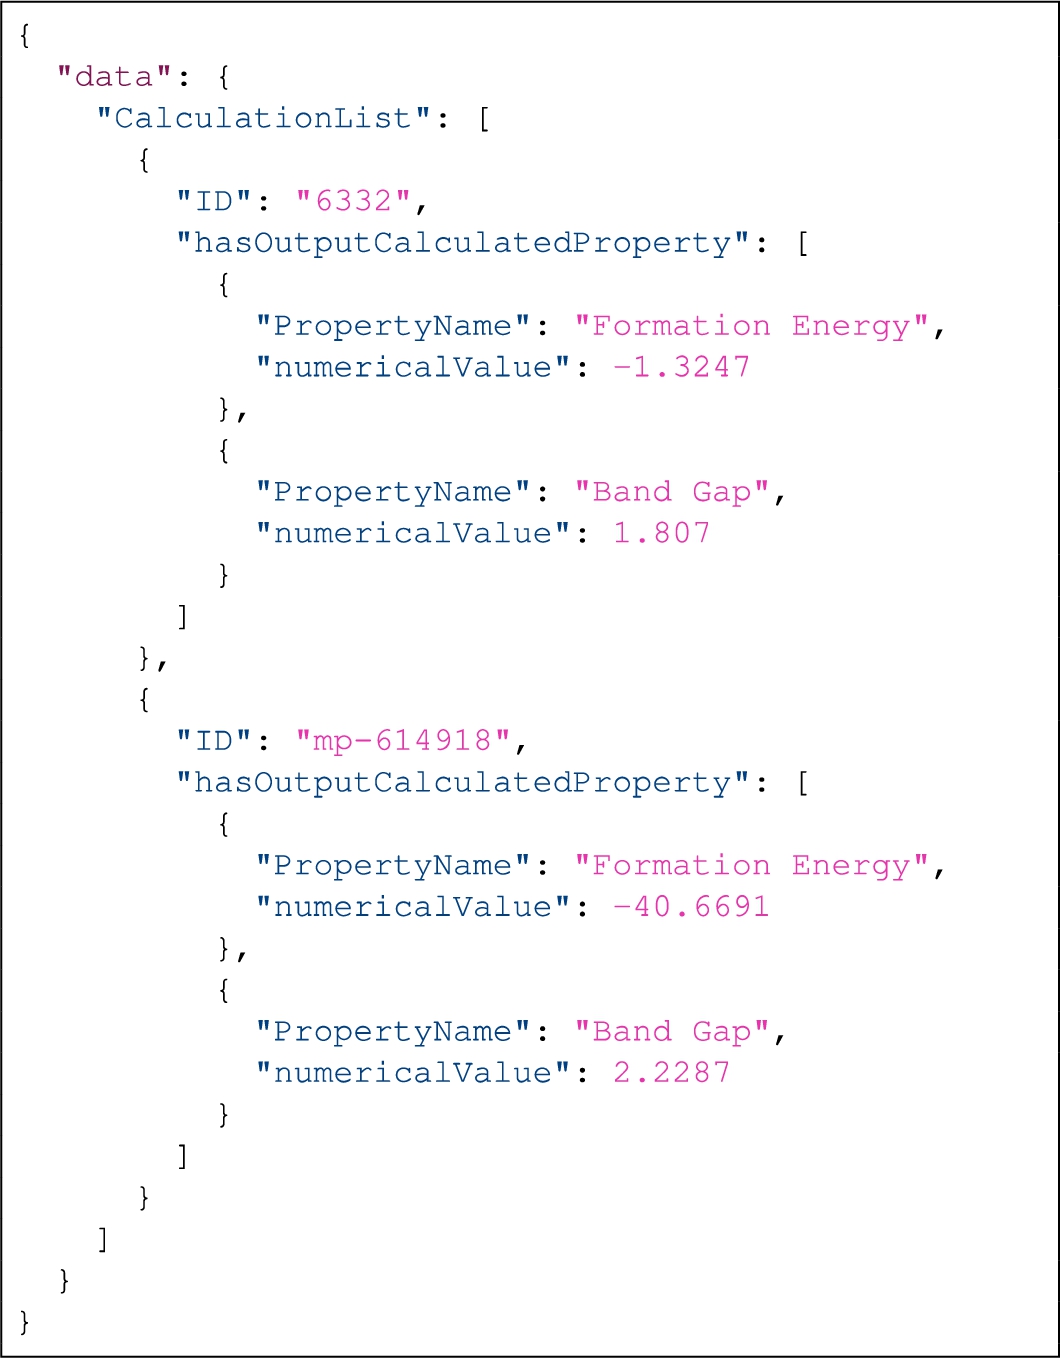 The JSON response (an excerpt) of the query in Listing 12